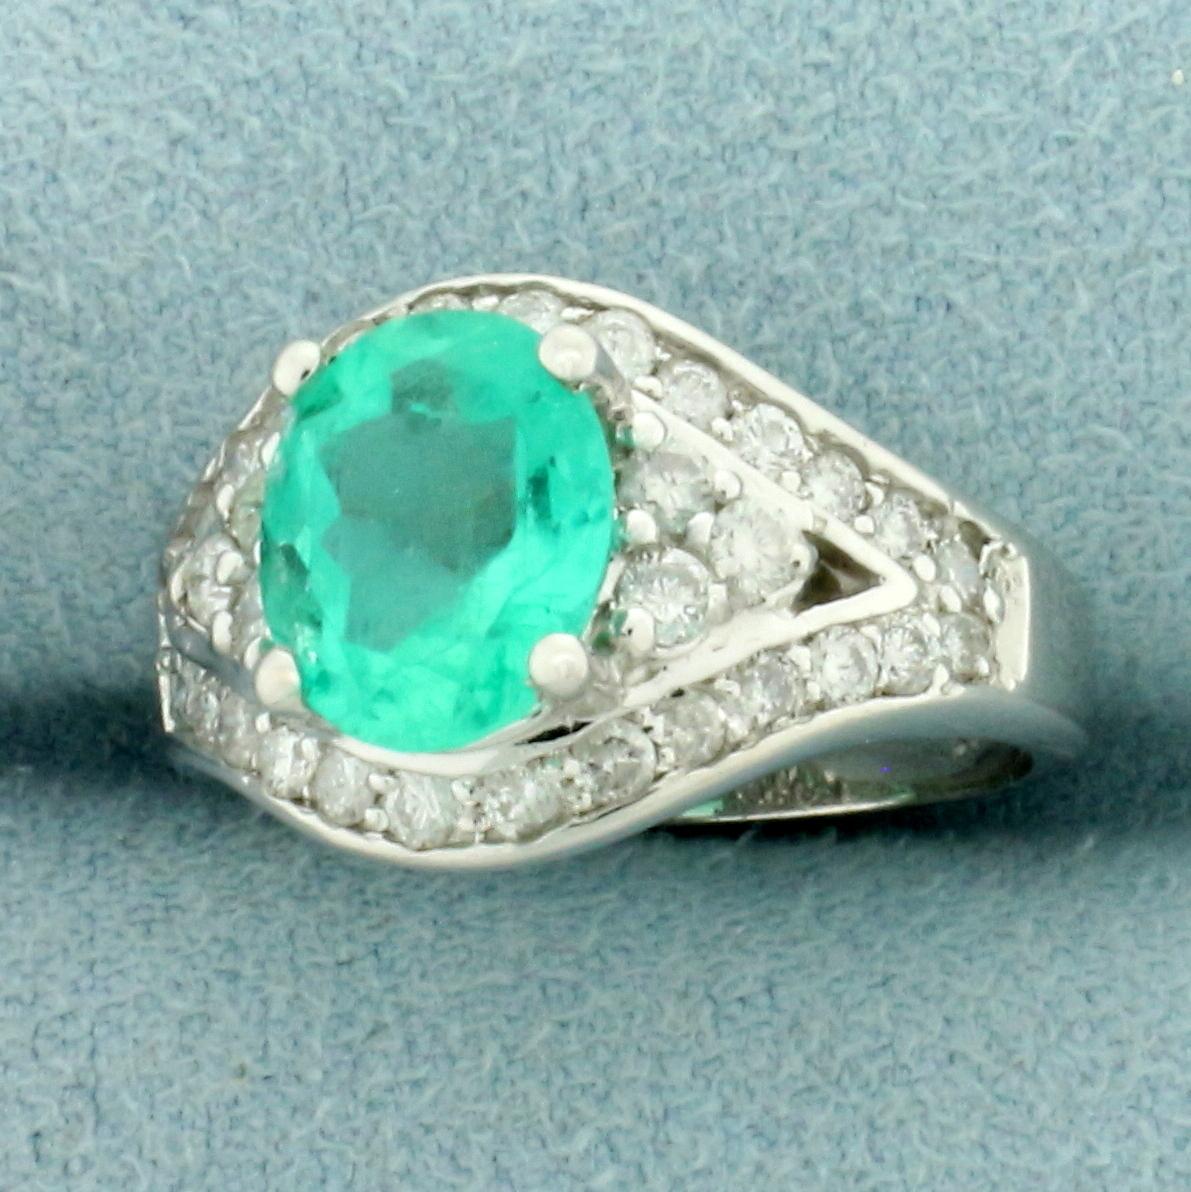 2ct Emerald And Diamond Ring In 14k White Gold